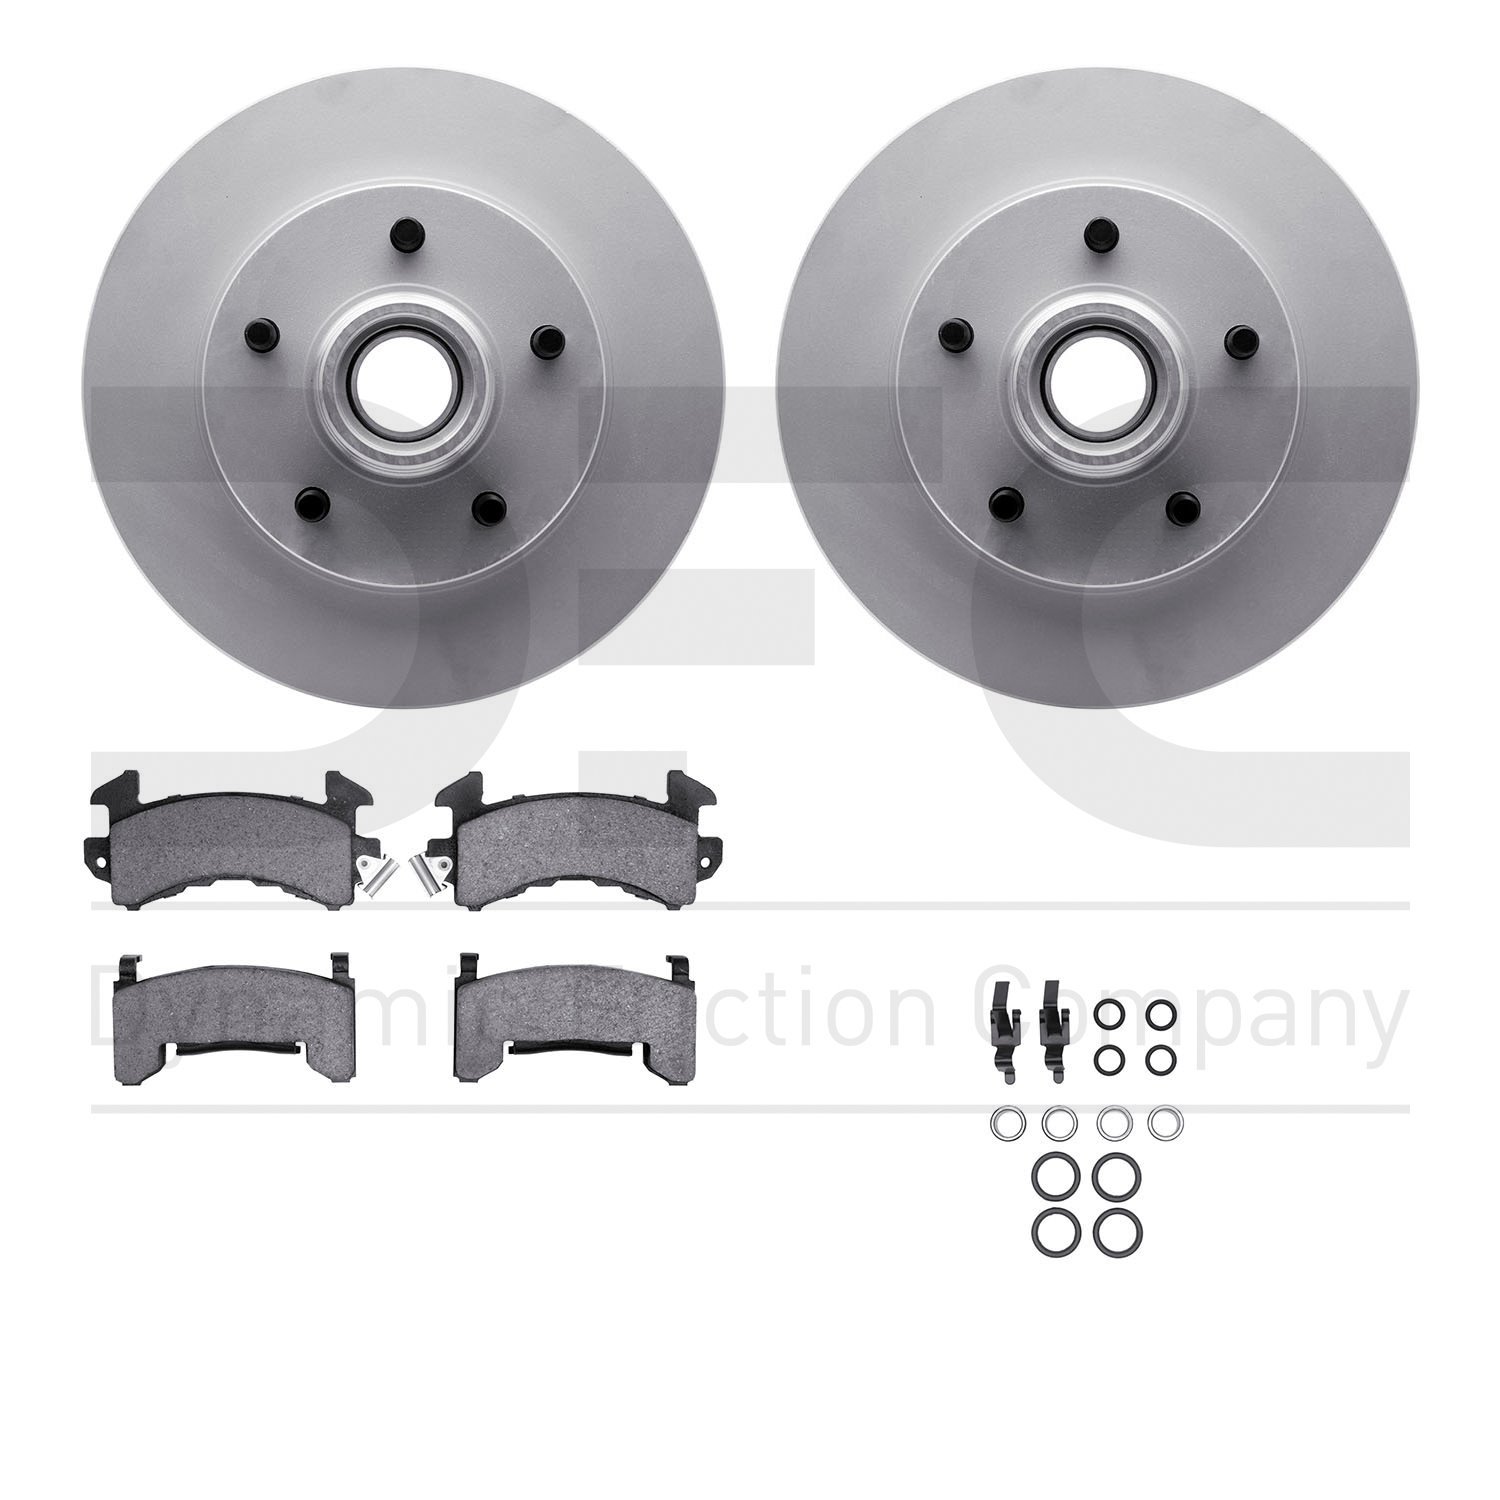 4412-47005 Geospec Brake Rotors with Ultimate-Duty Brake Pads & Hardware, 1982-1995 GM, Position: Front